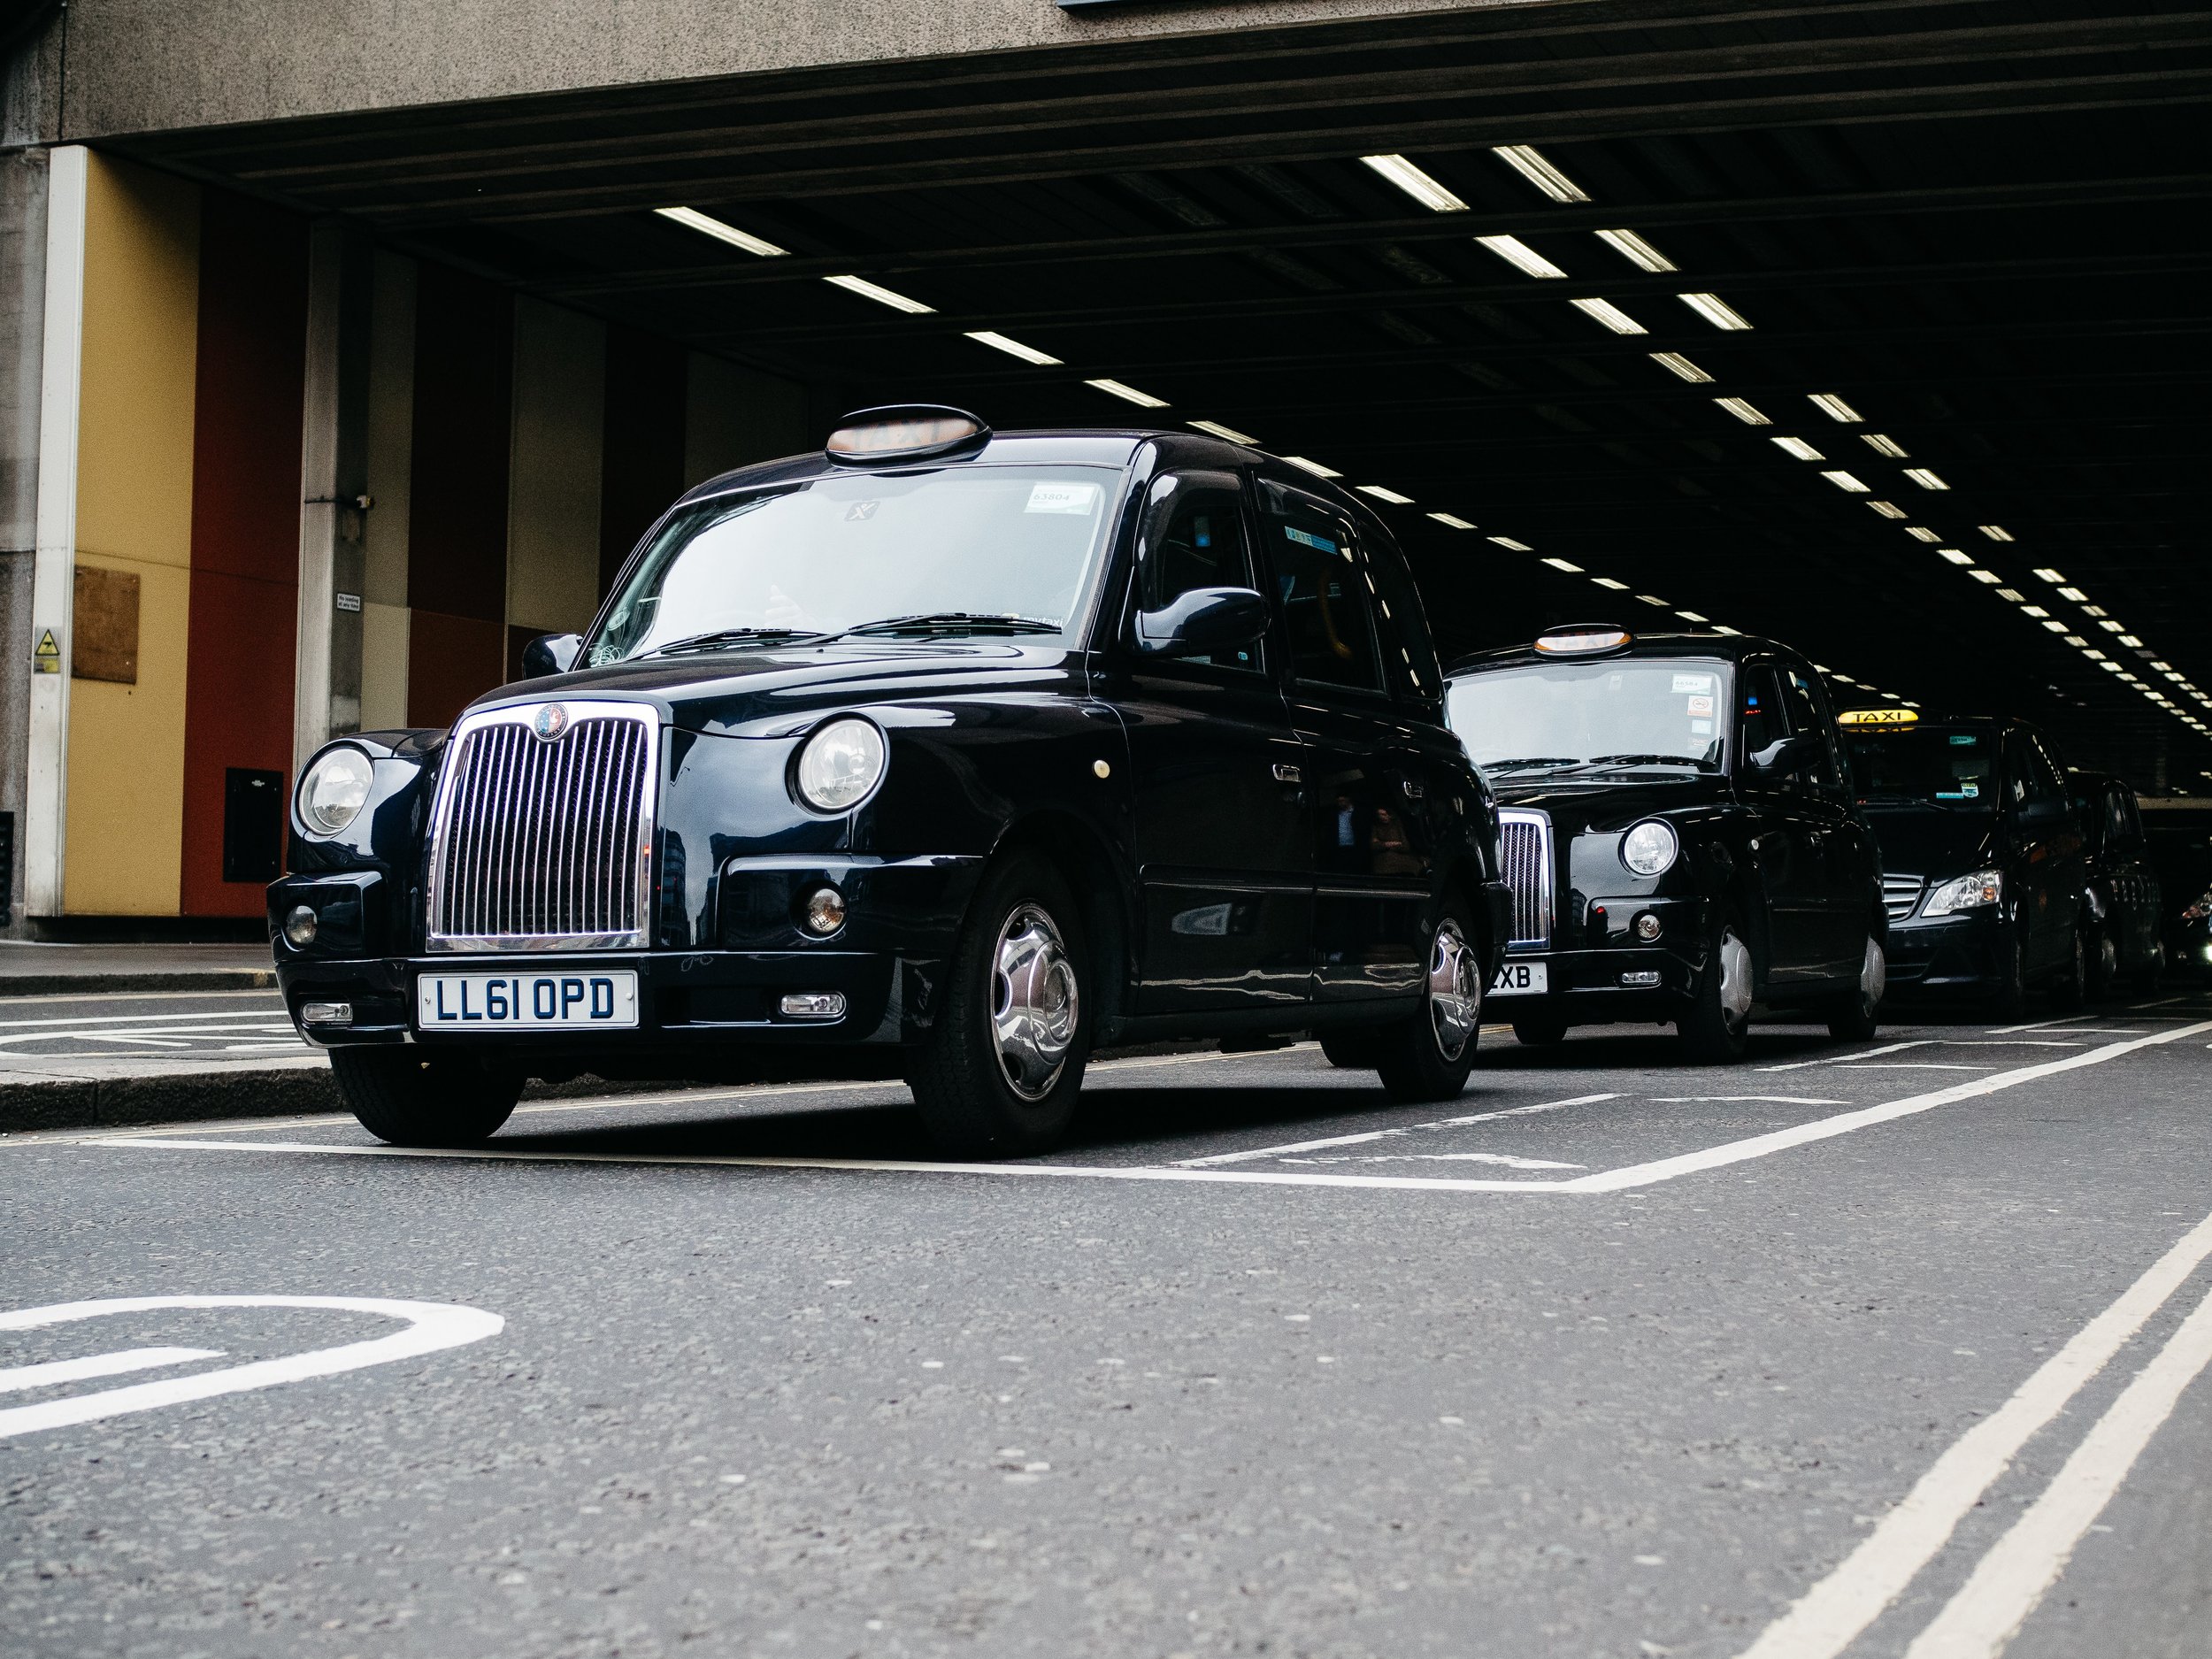  Reforming Taxis for the 21st Century   A Fare Shake    Read on  